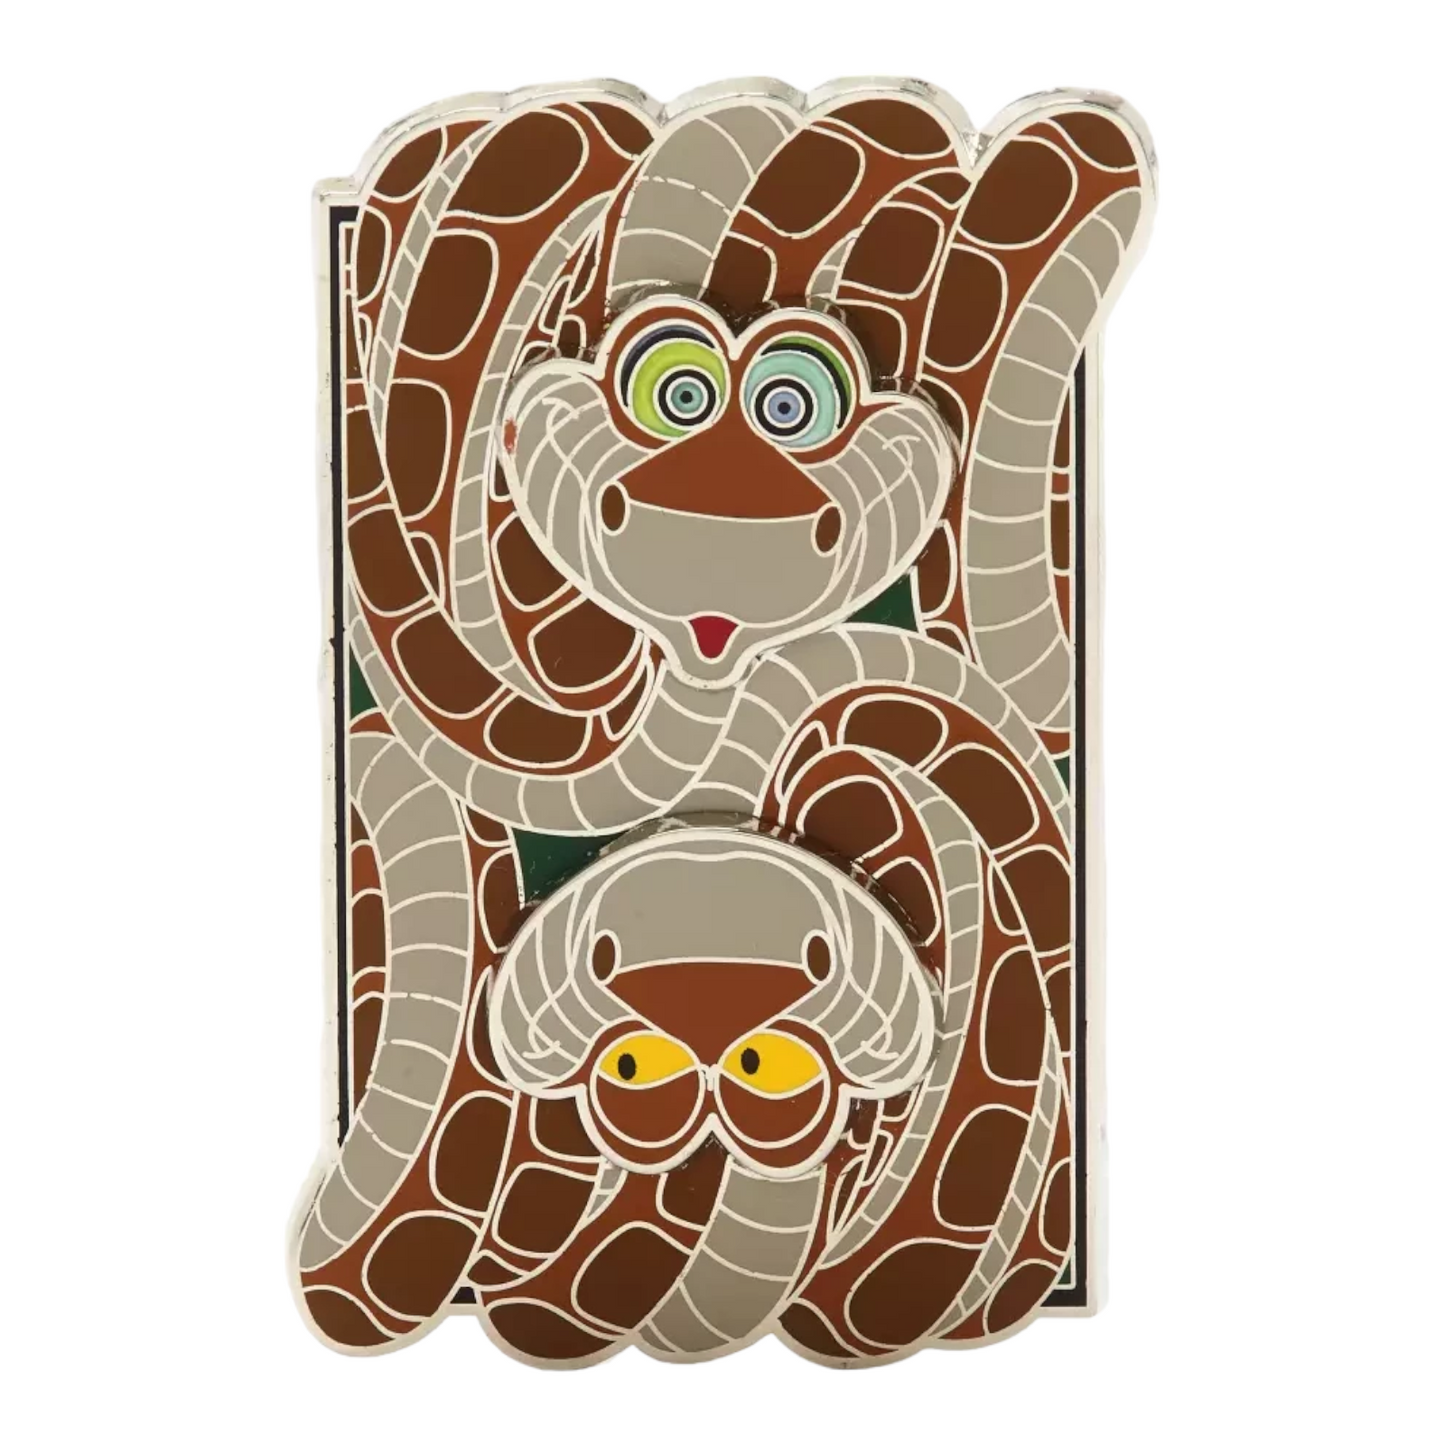 Kaa "Our Transformation Story" Pin